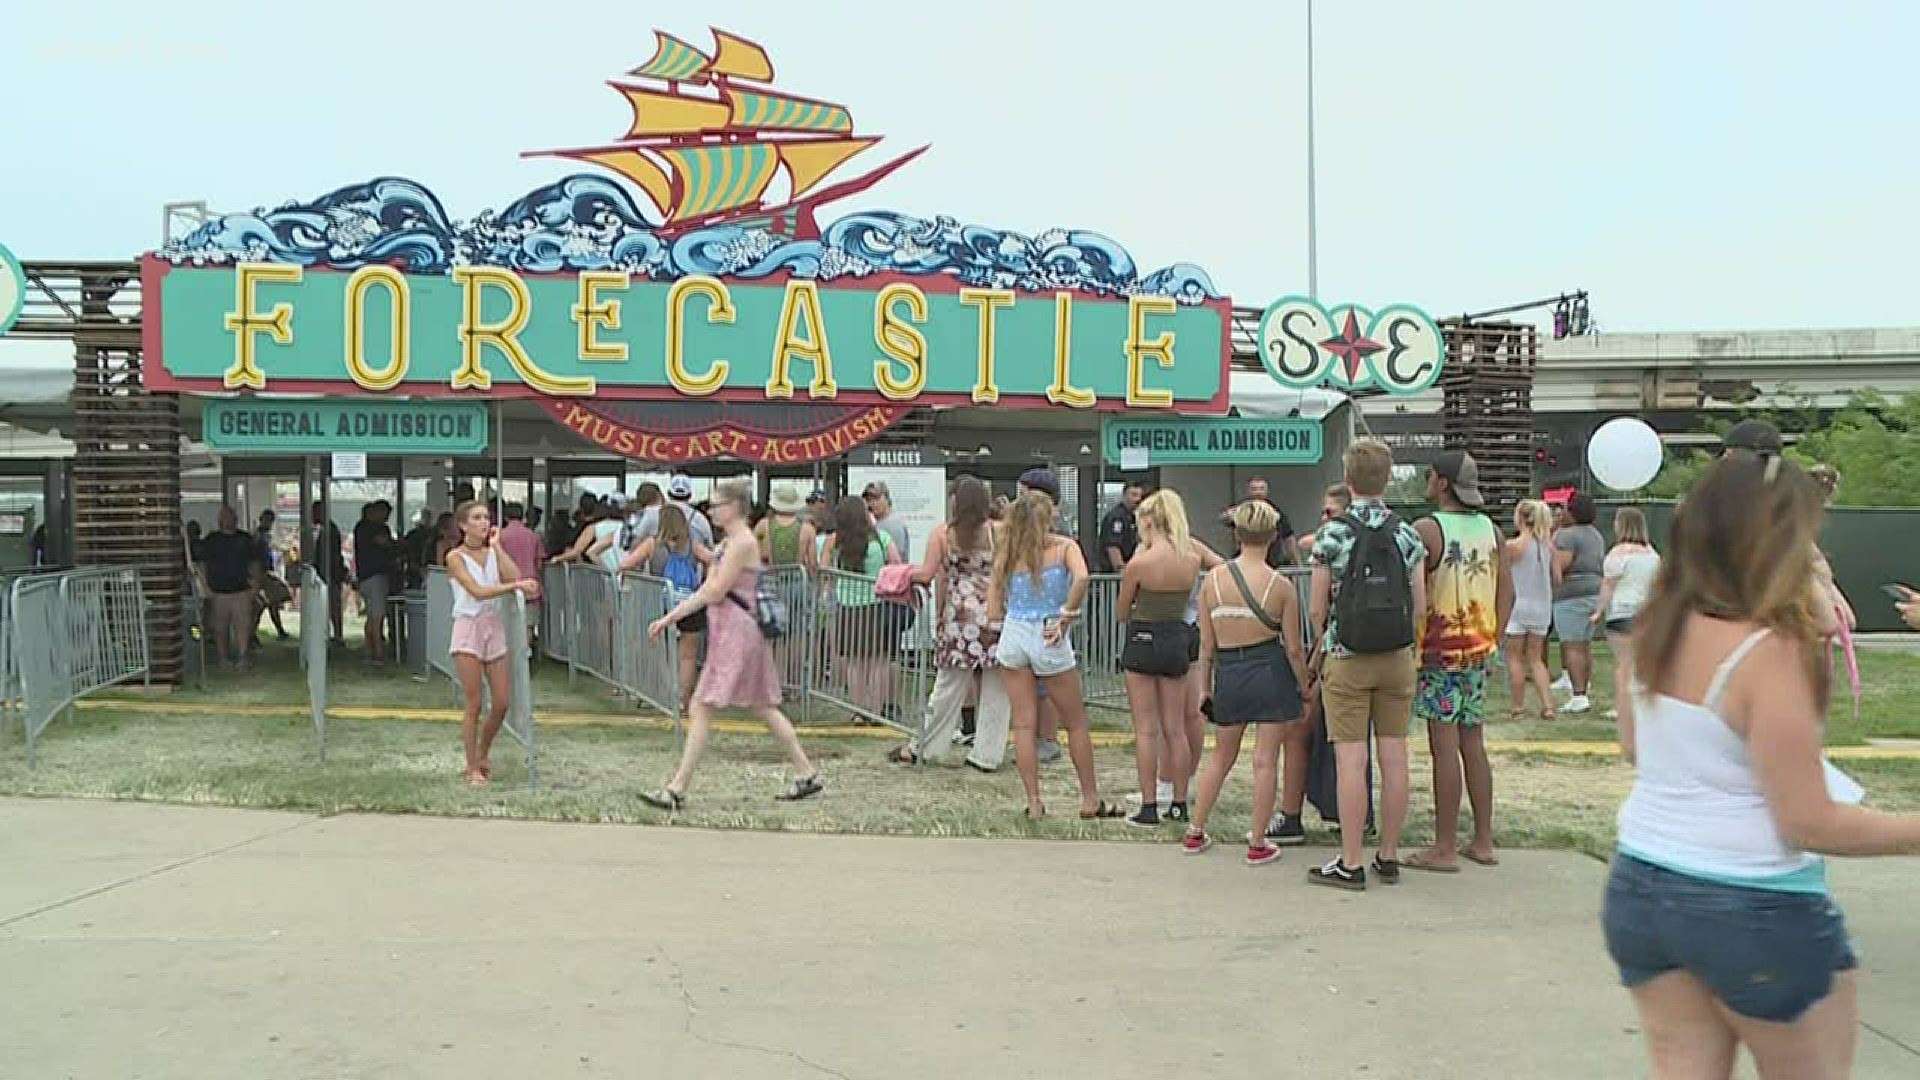 Forecastle cancels 2020 festival due to COVID-19 concerns